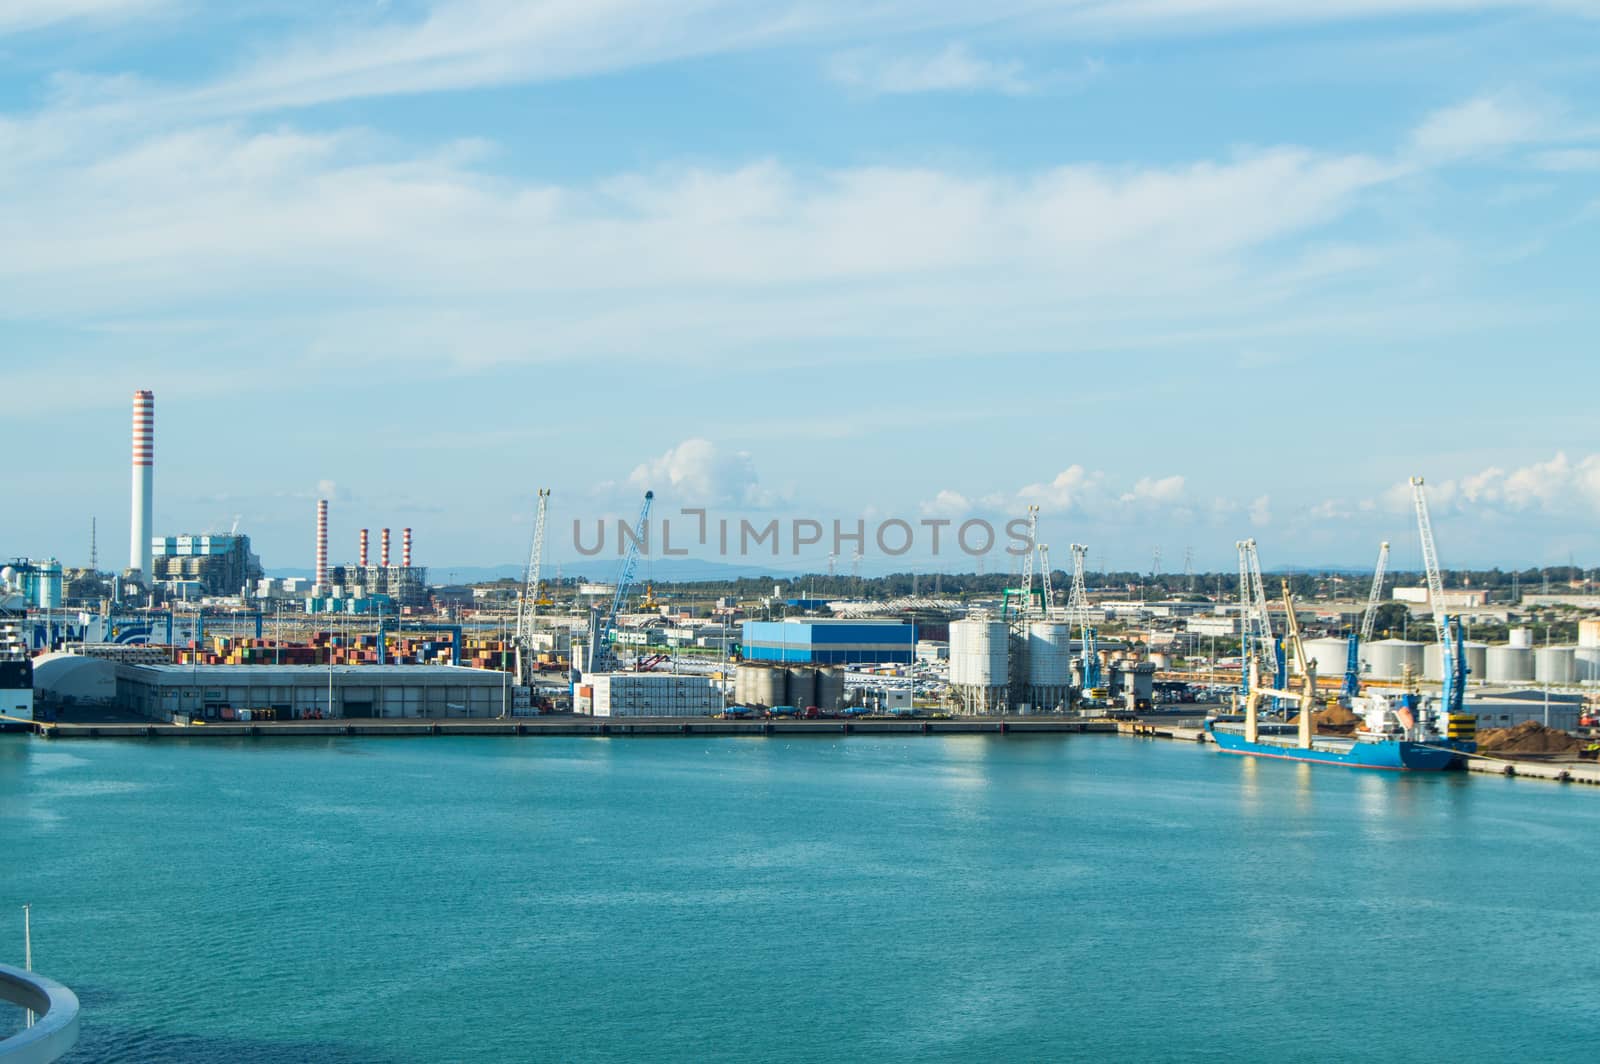 Port of Civitavecchia-the capital city of Rome, an important cargo port for Maritime transport in Italy.